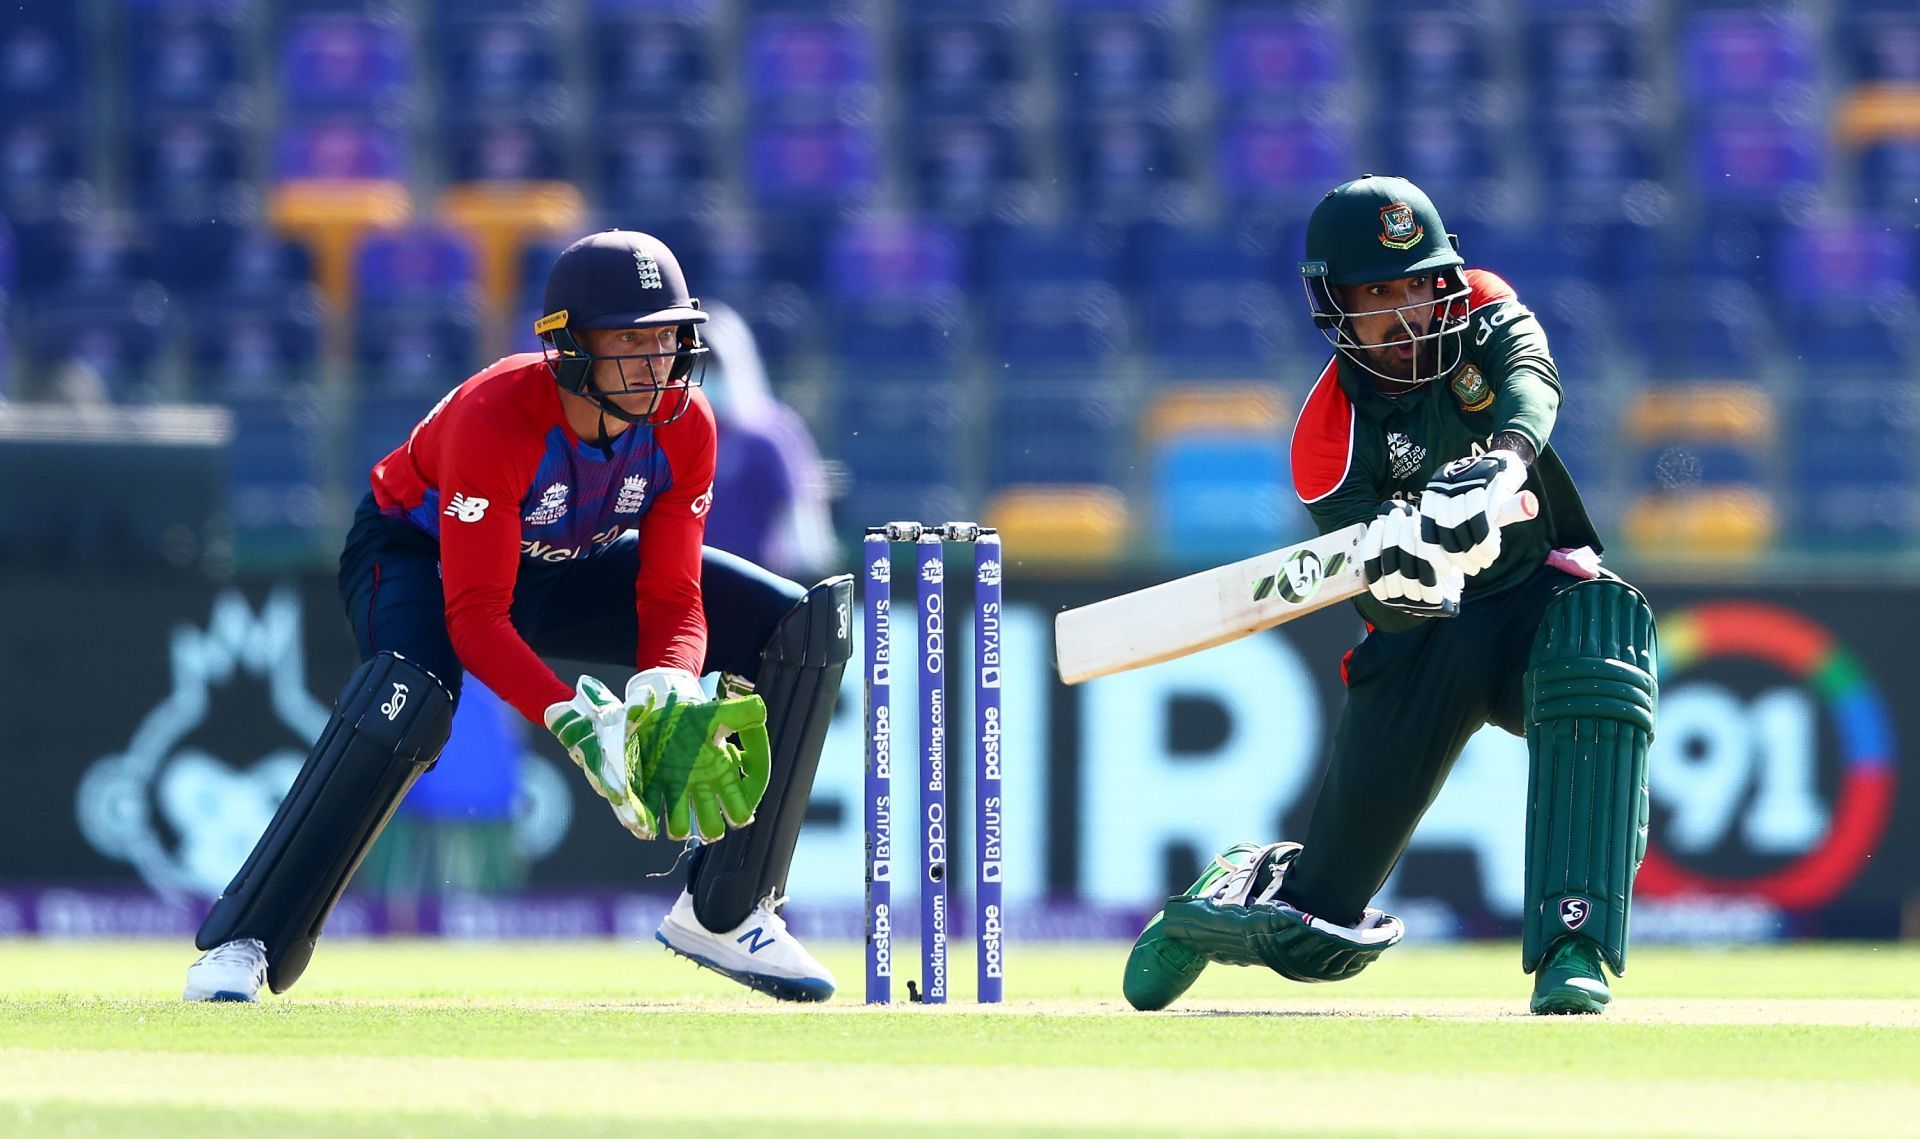 The Bangladesh batters threw away their wickets against England